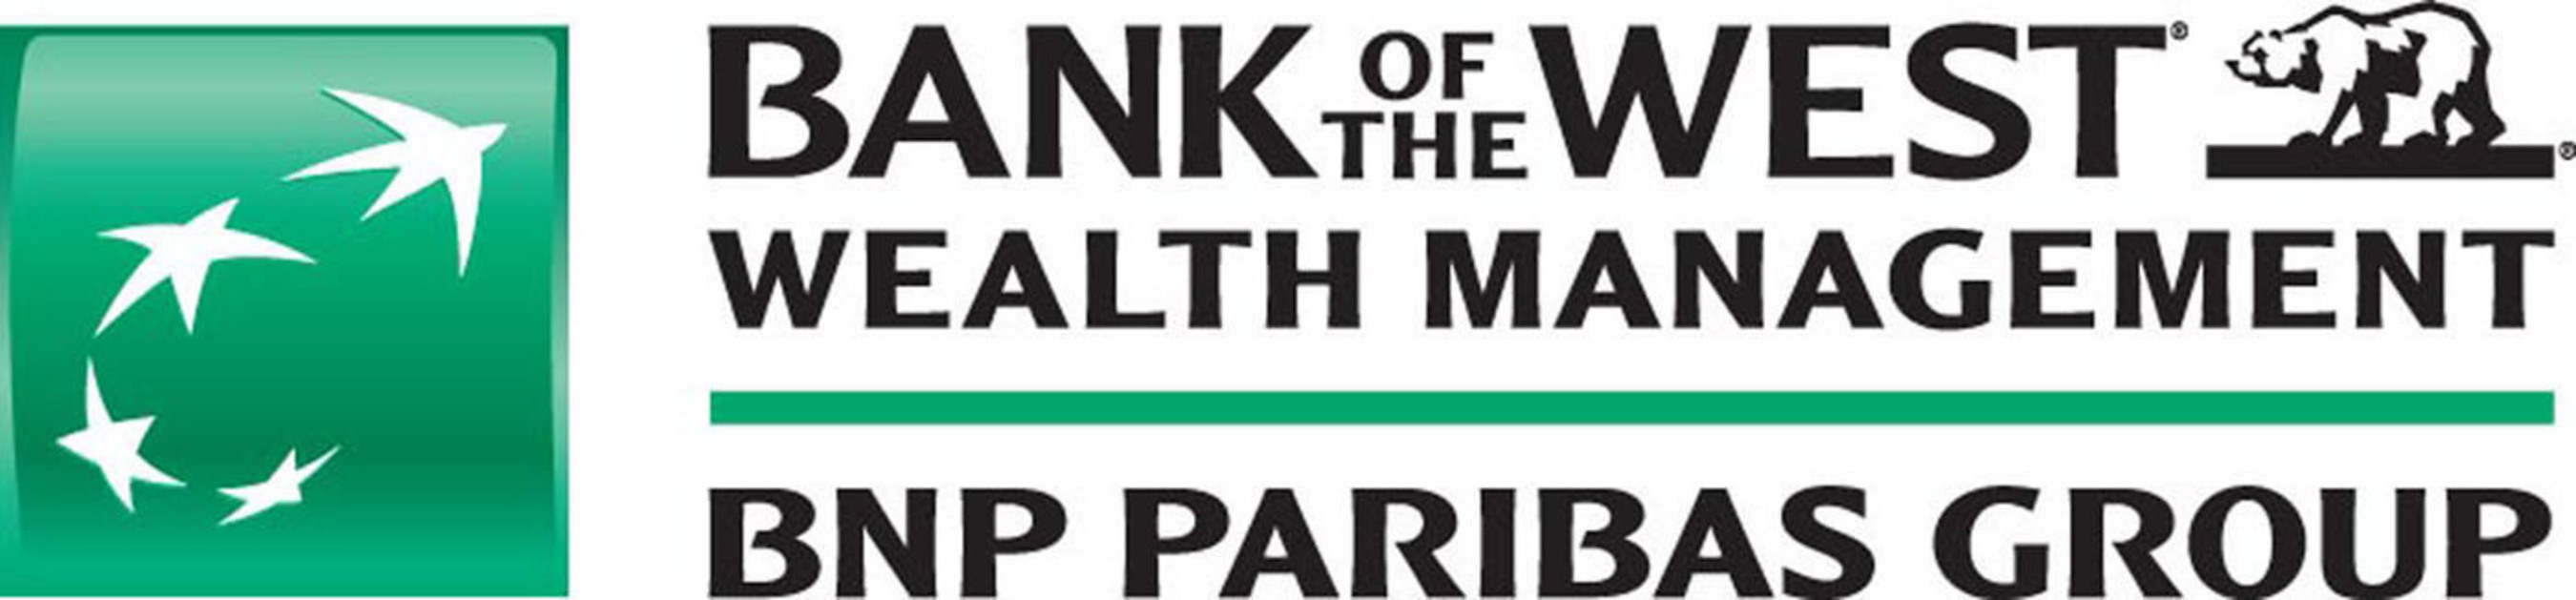 Bank of the West Wealth Management logo